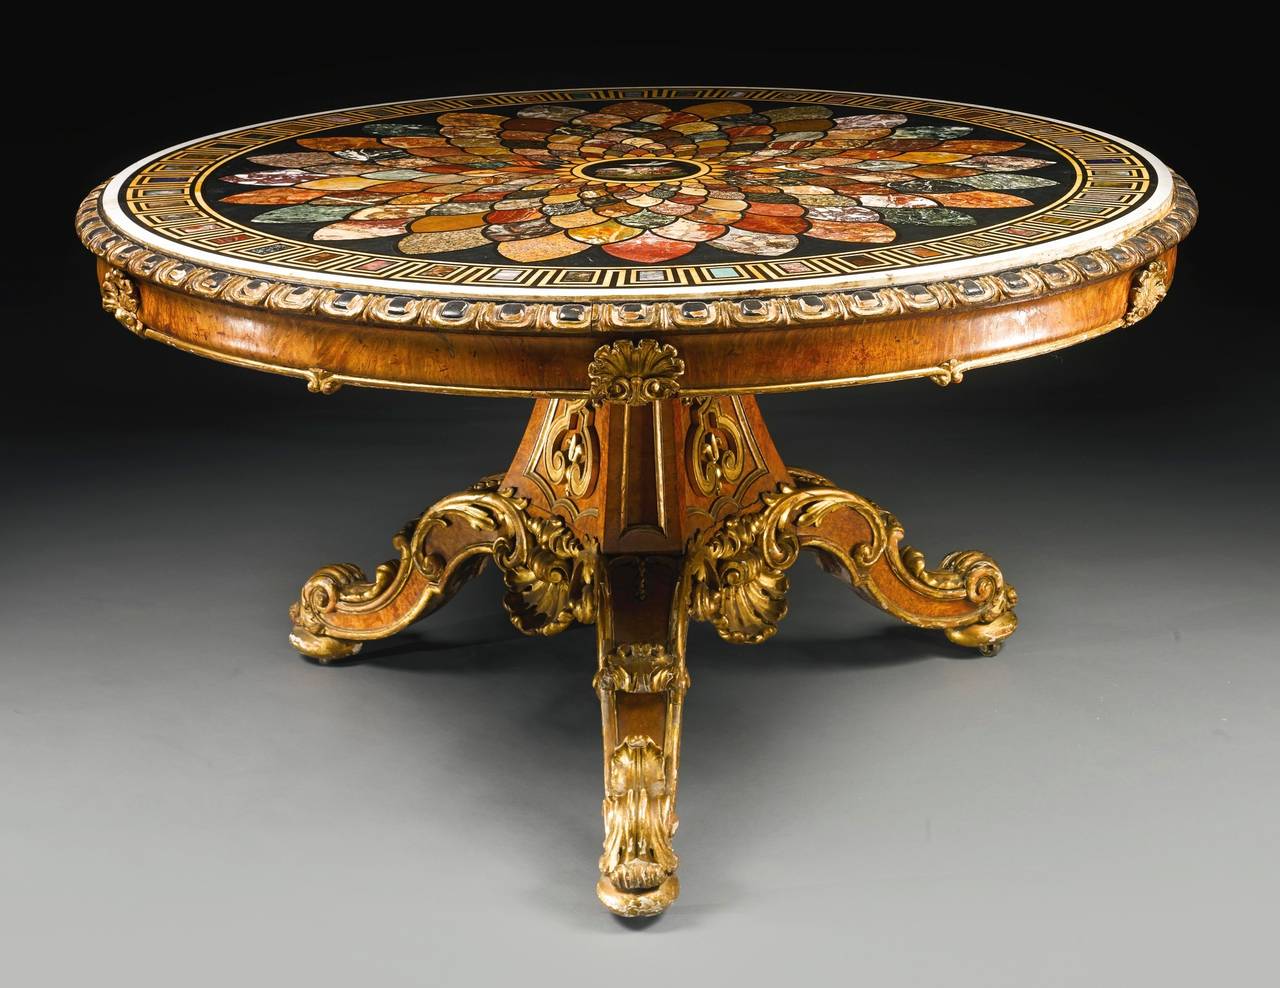 Constructed in Burr Walnut, in part ebonized and parcel gilt, with a specimen marble and micromosaic platform, probably by Alfonso Cavamelli of Rome: rising from a tripartite base, the legs of scrolled and hipped form, boldly carved with ‘C’